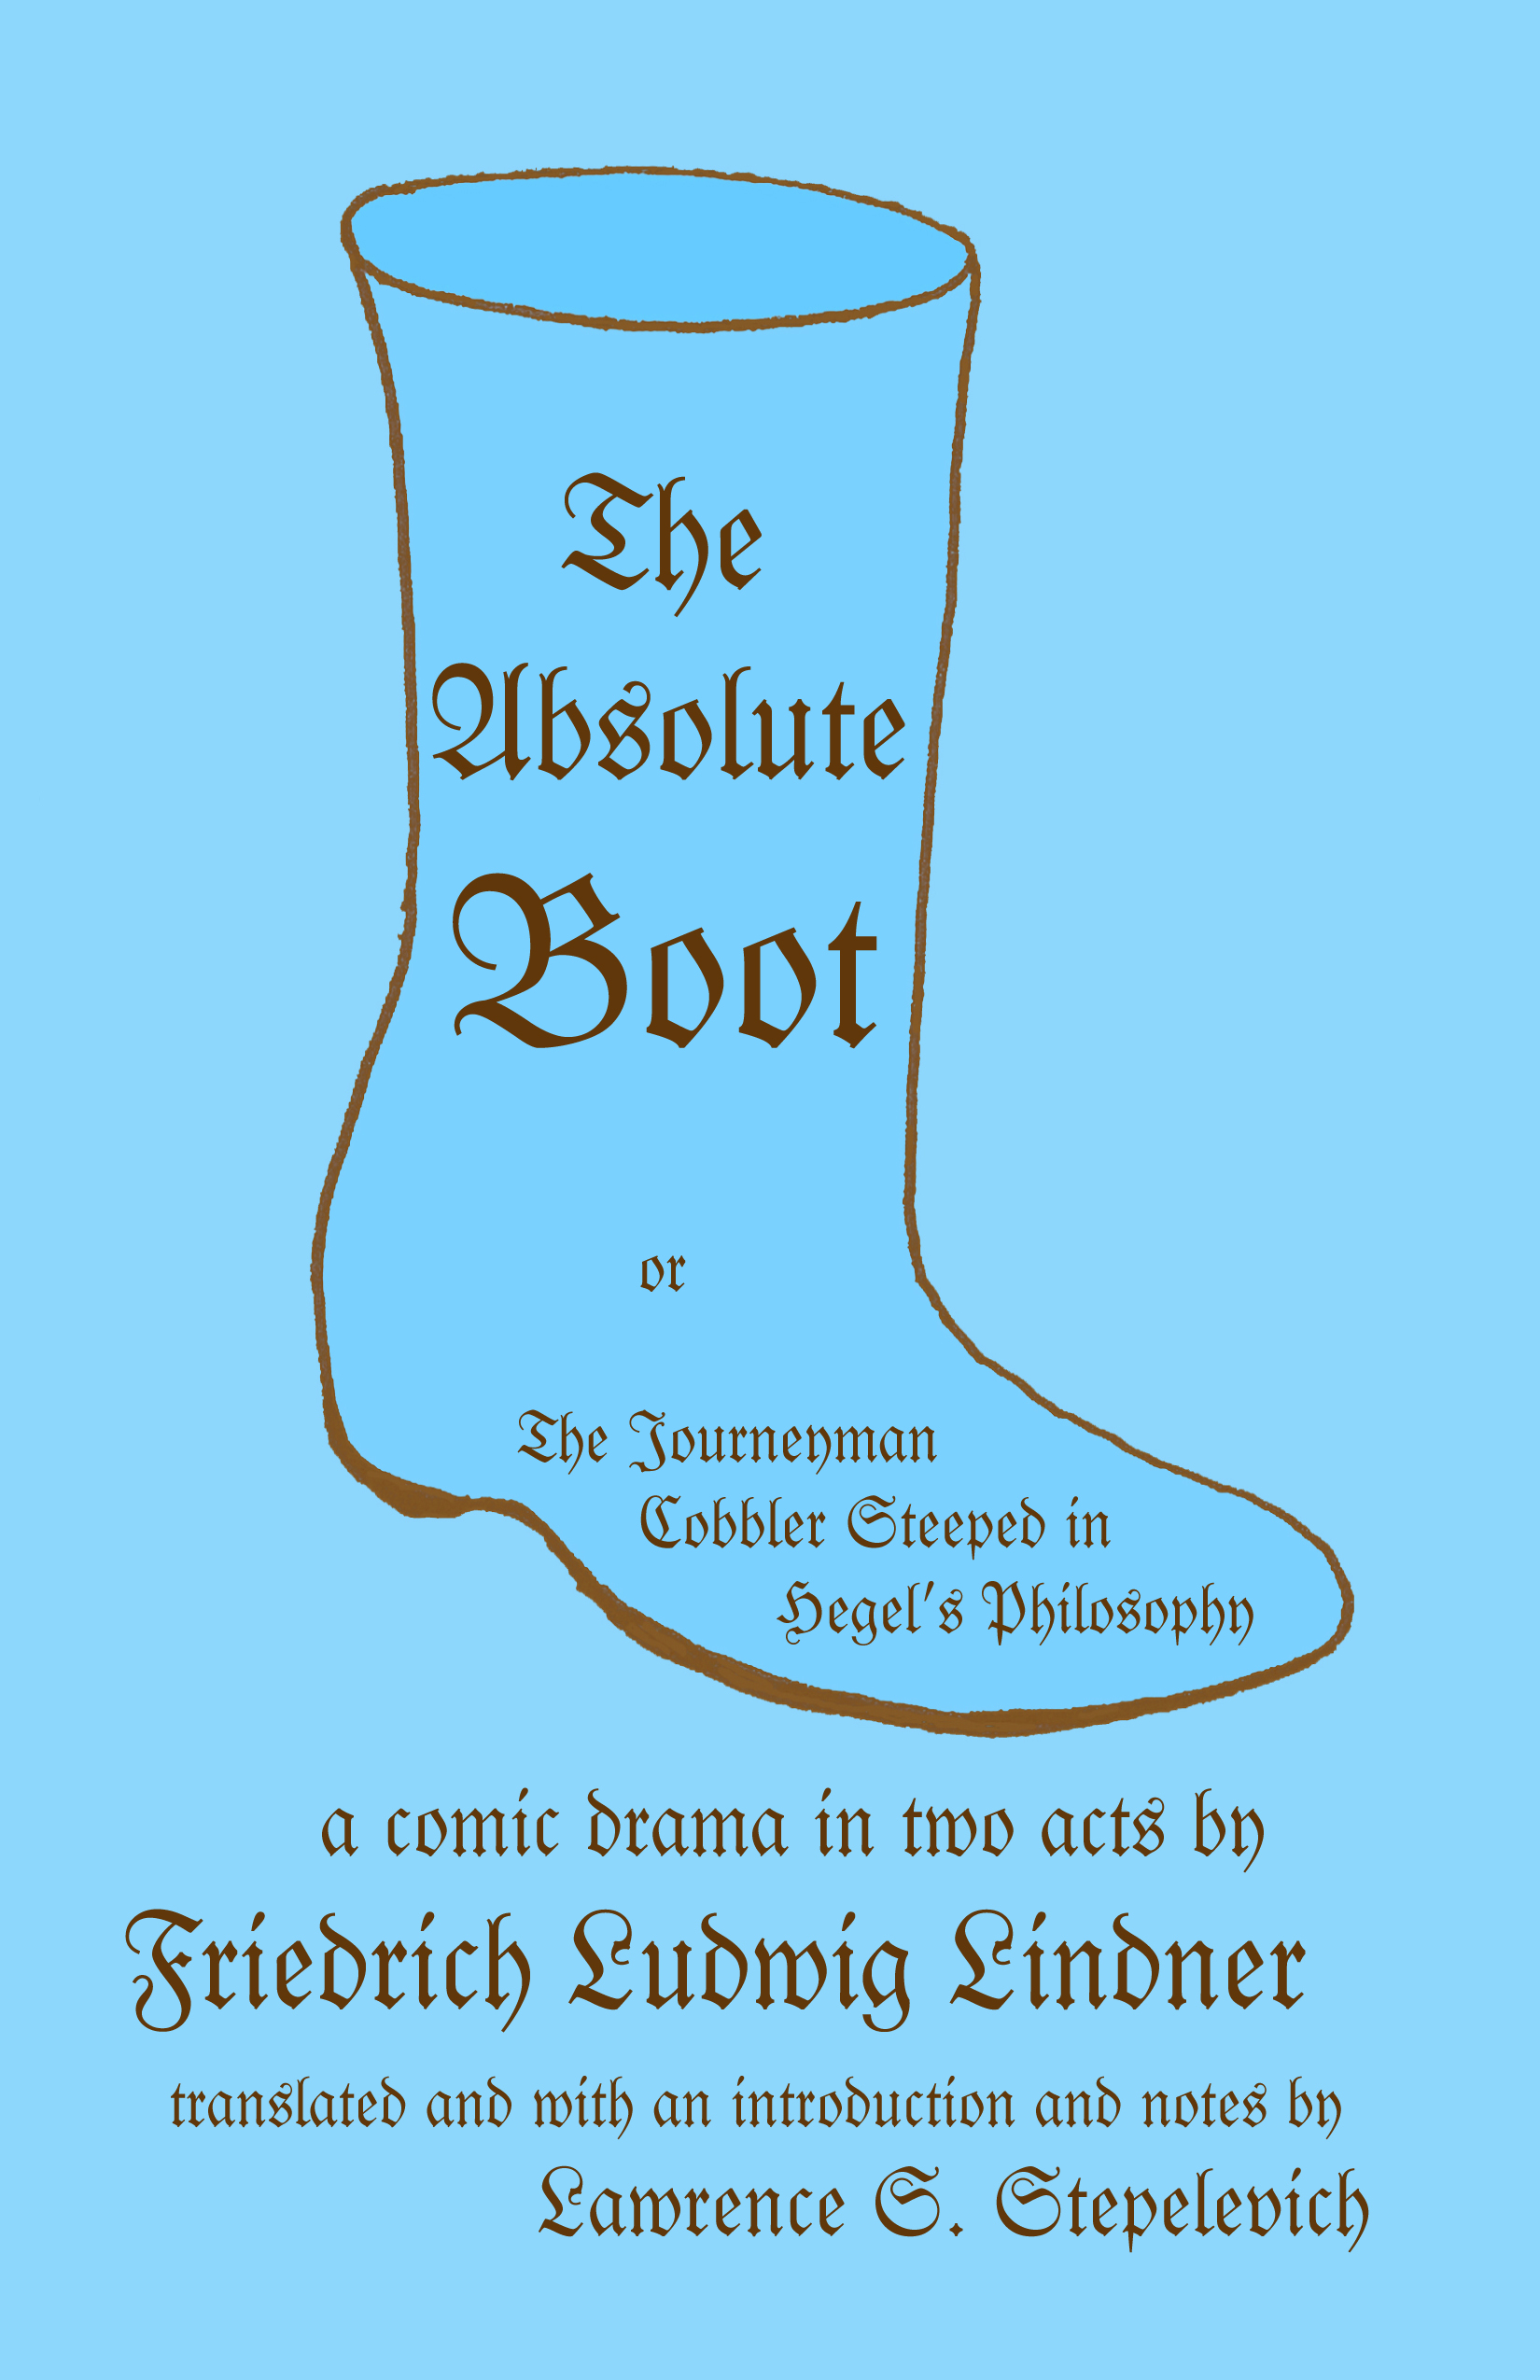 The Absolute Boot, or, The Journeyman Cobbler Steeped in Hegel's Philosophy by Friedrich Ludwig Lindner, translated by Lawrence S. Stepelevich